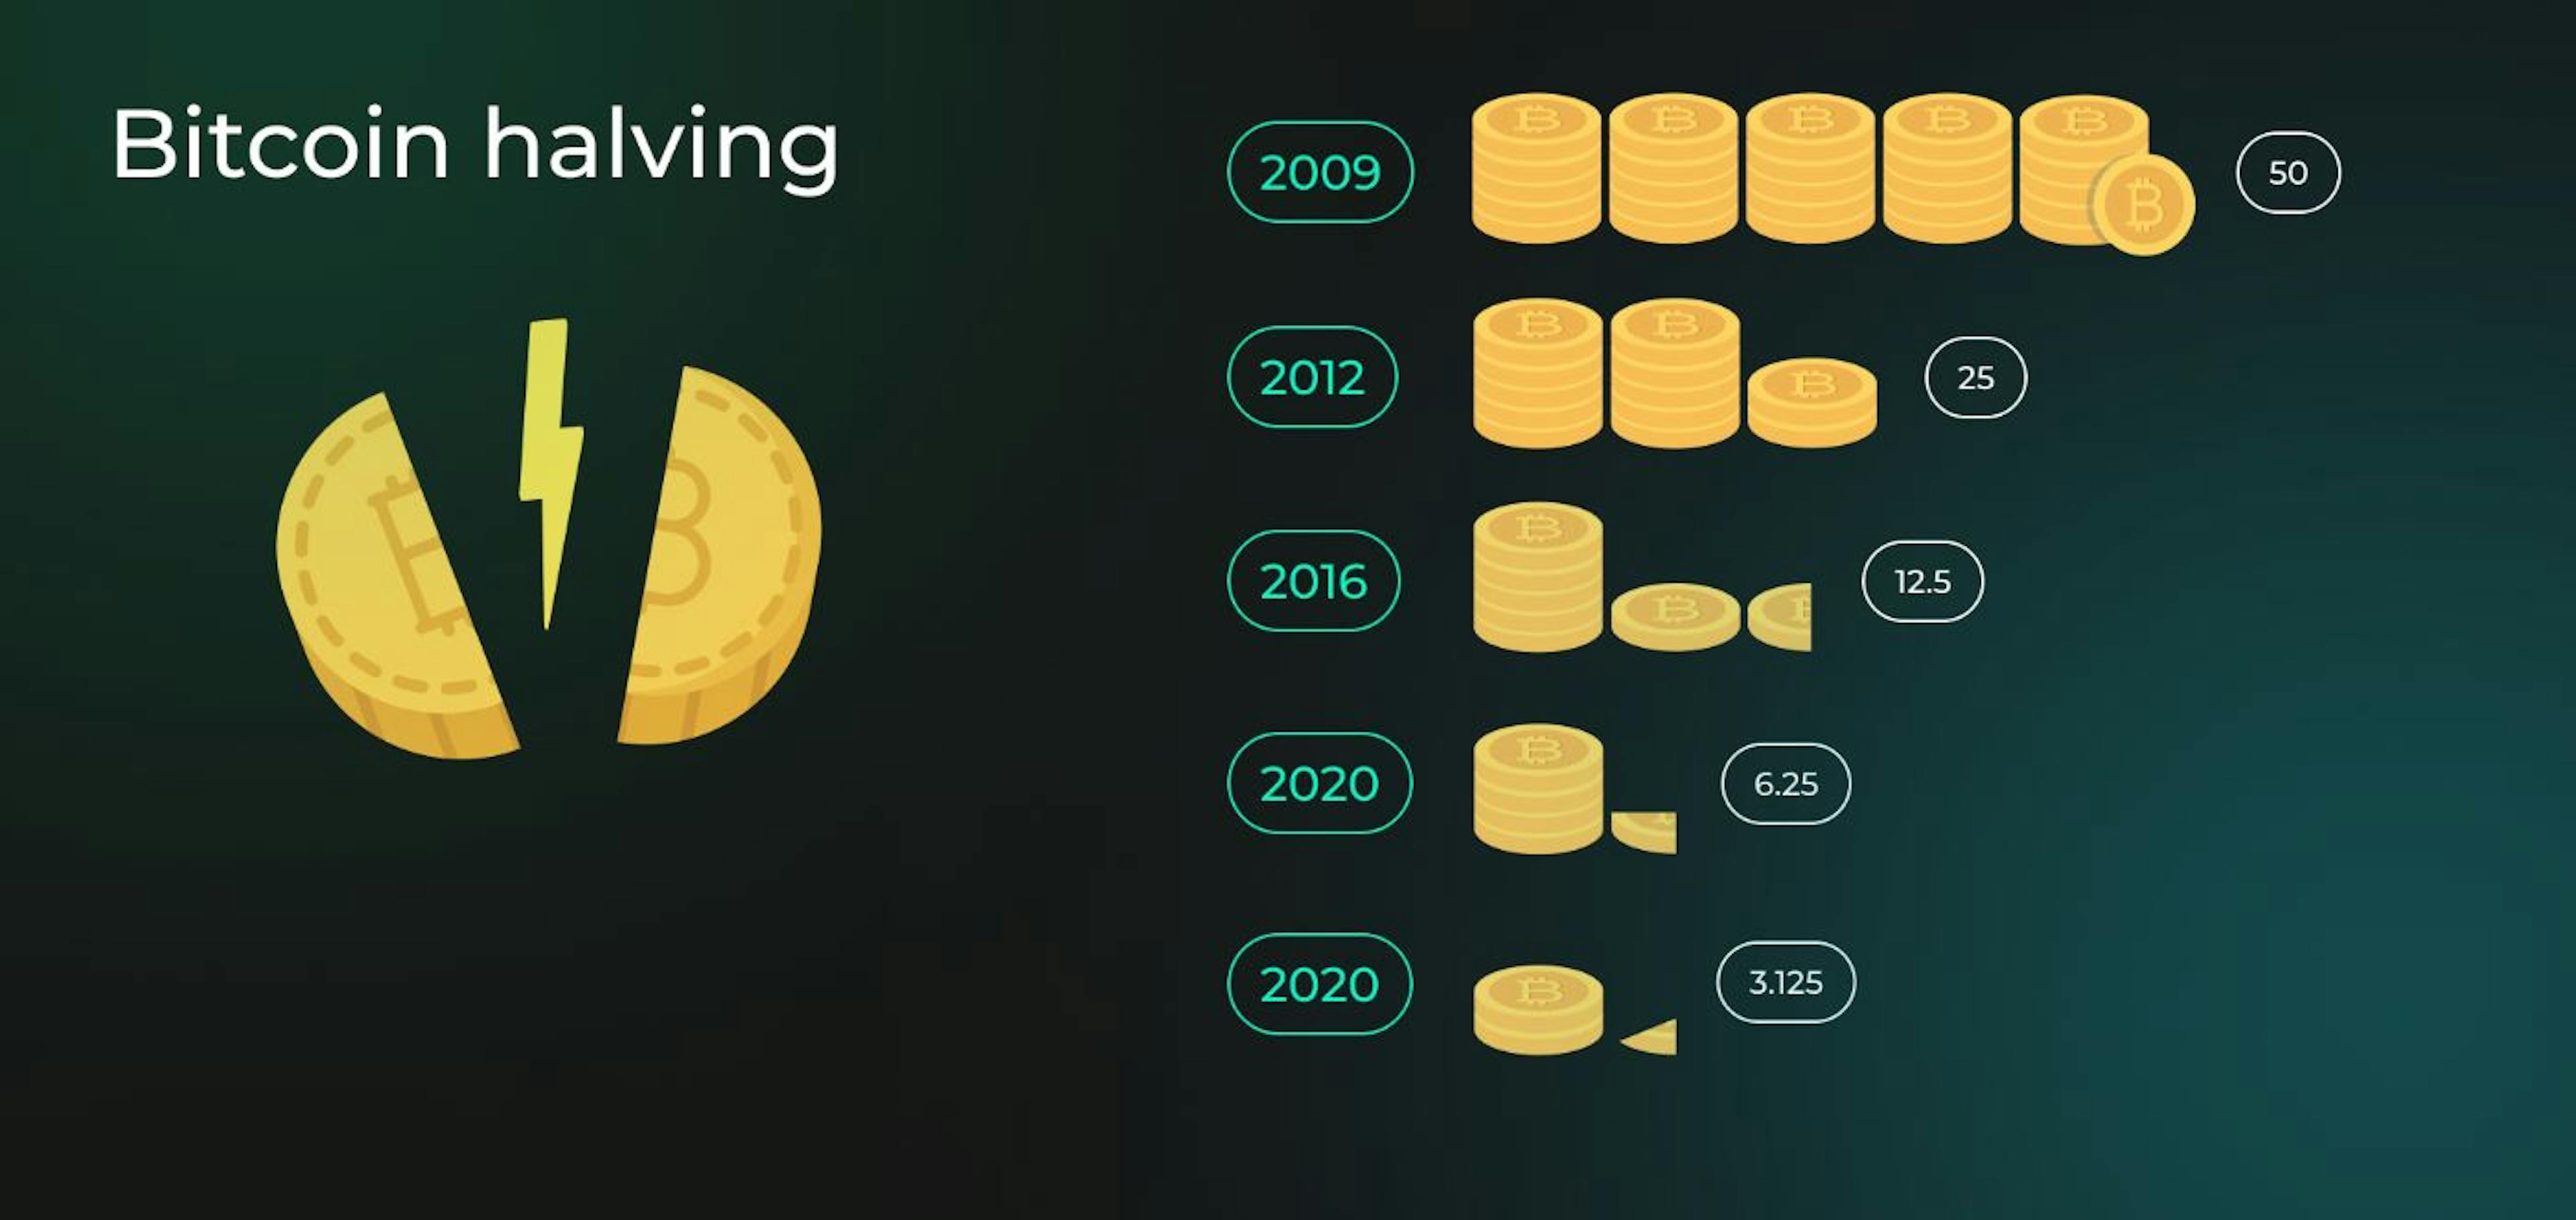 Illustration of halving and the change in miners' reward per block in BTC with each halving. From 2009 to 2024